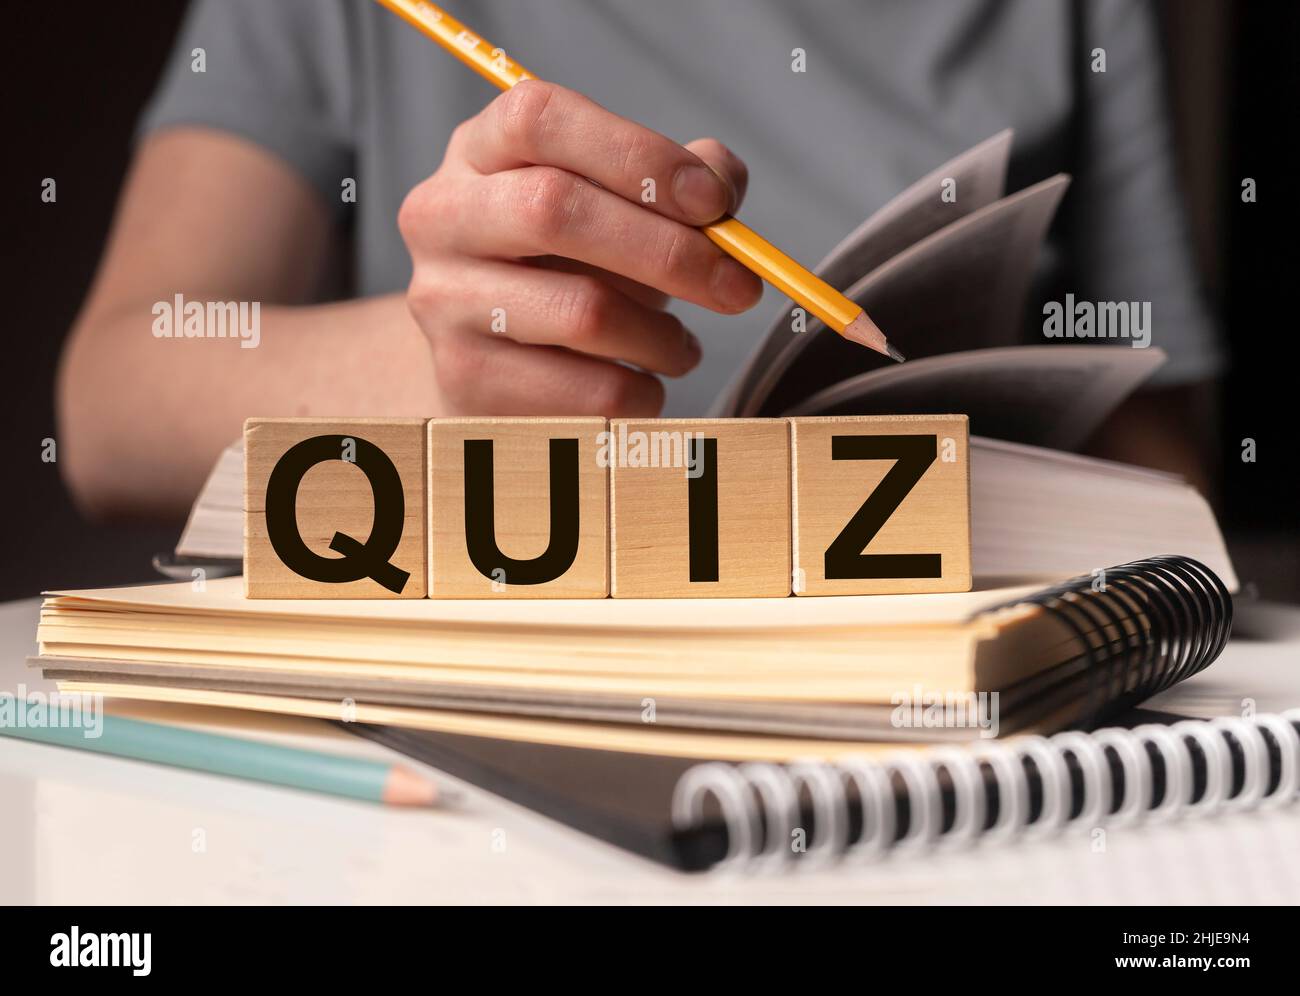 Quizz 170 of